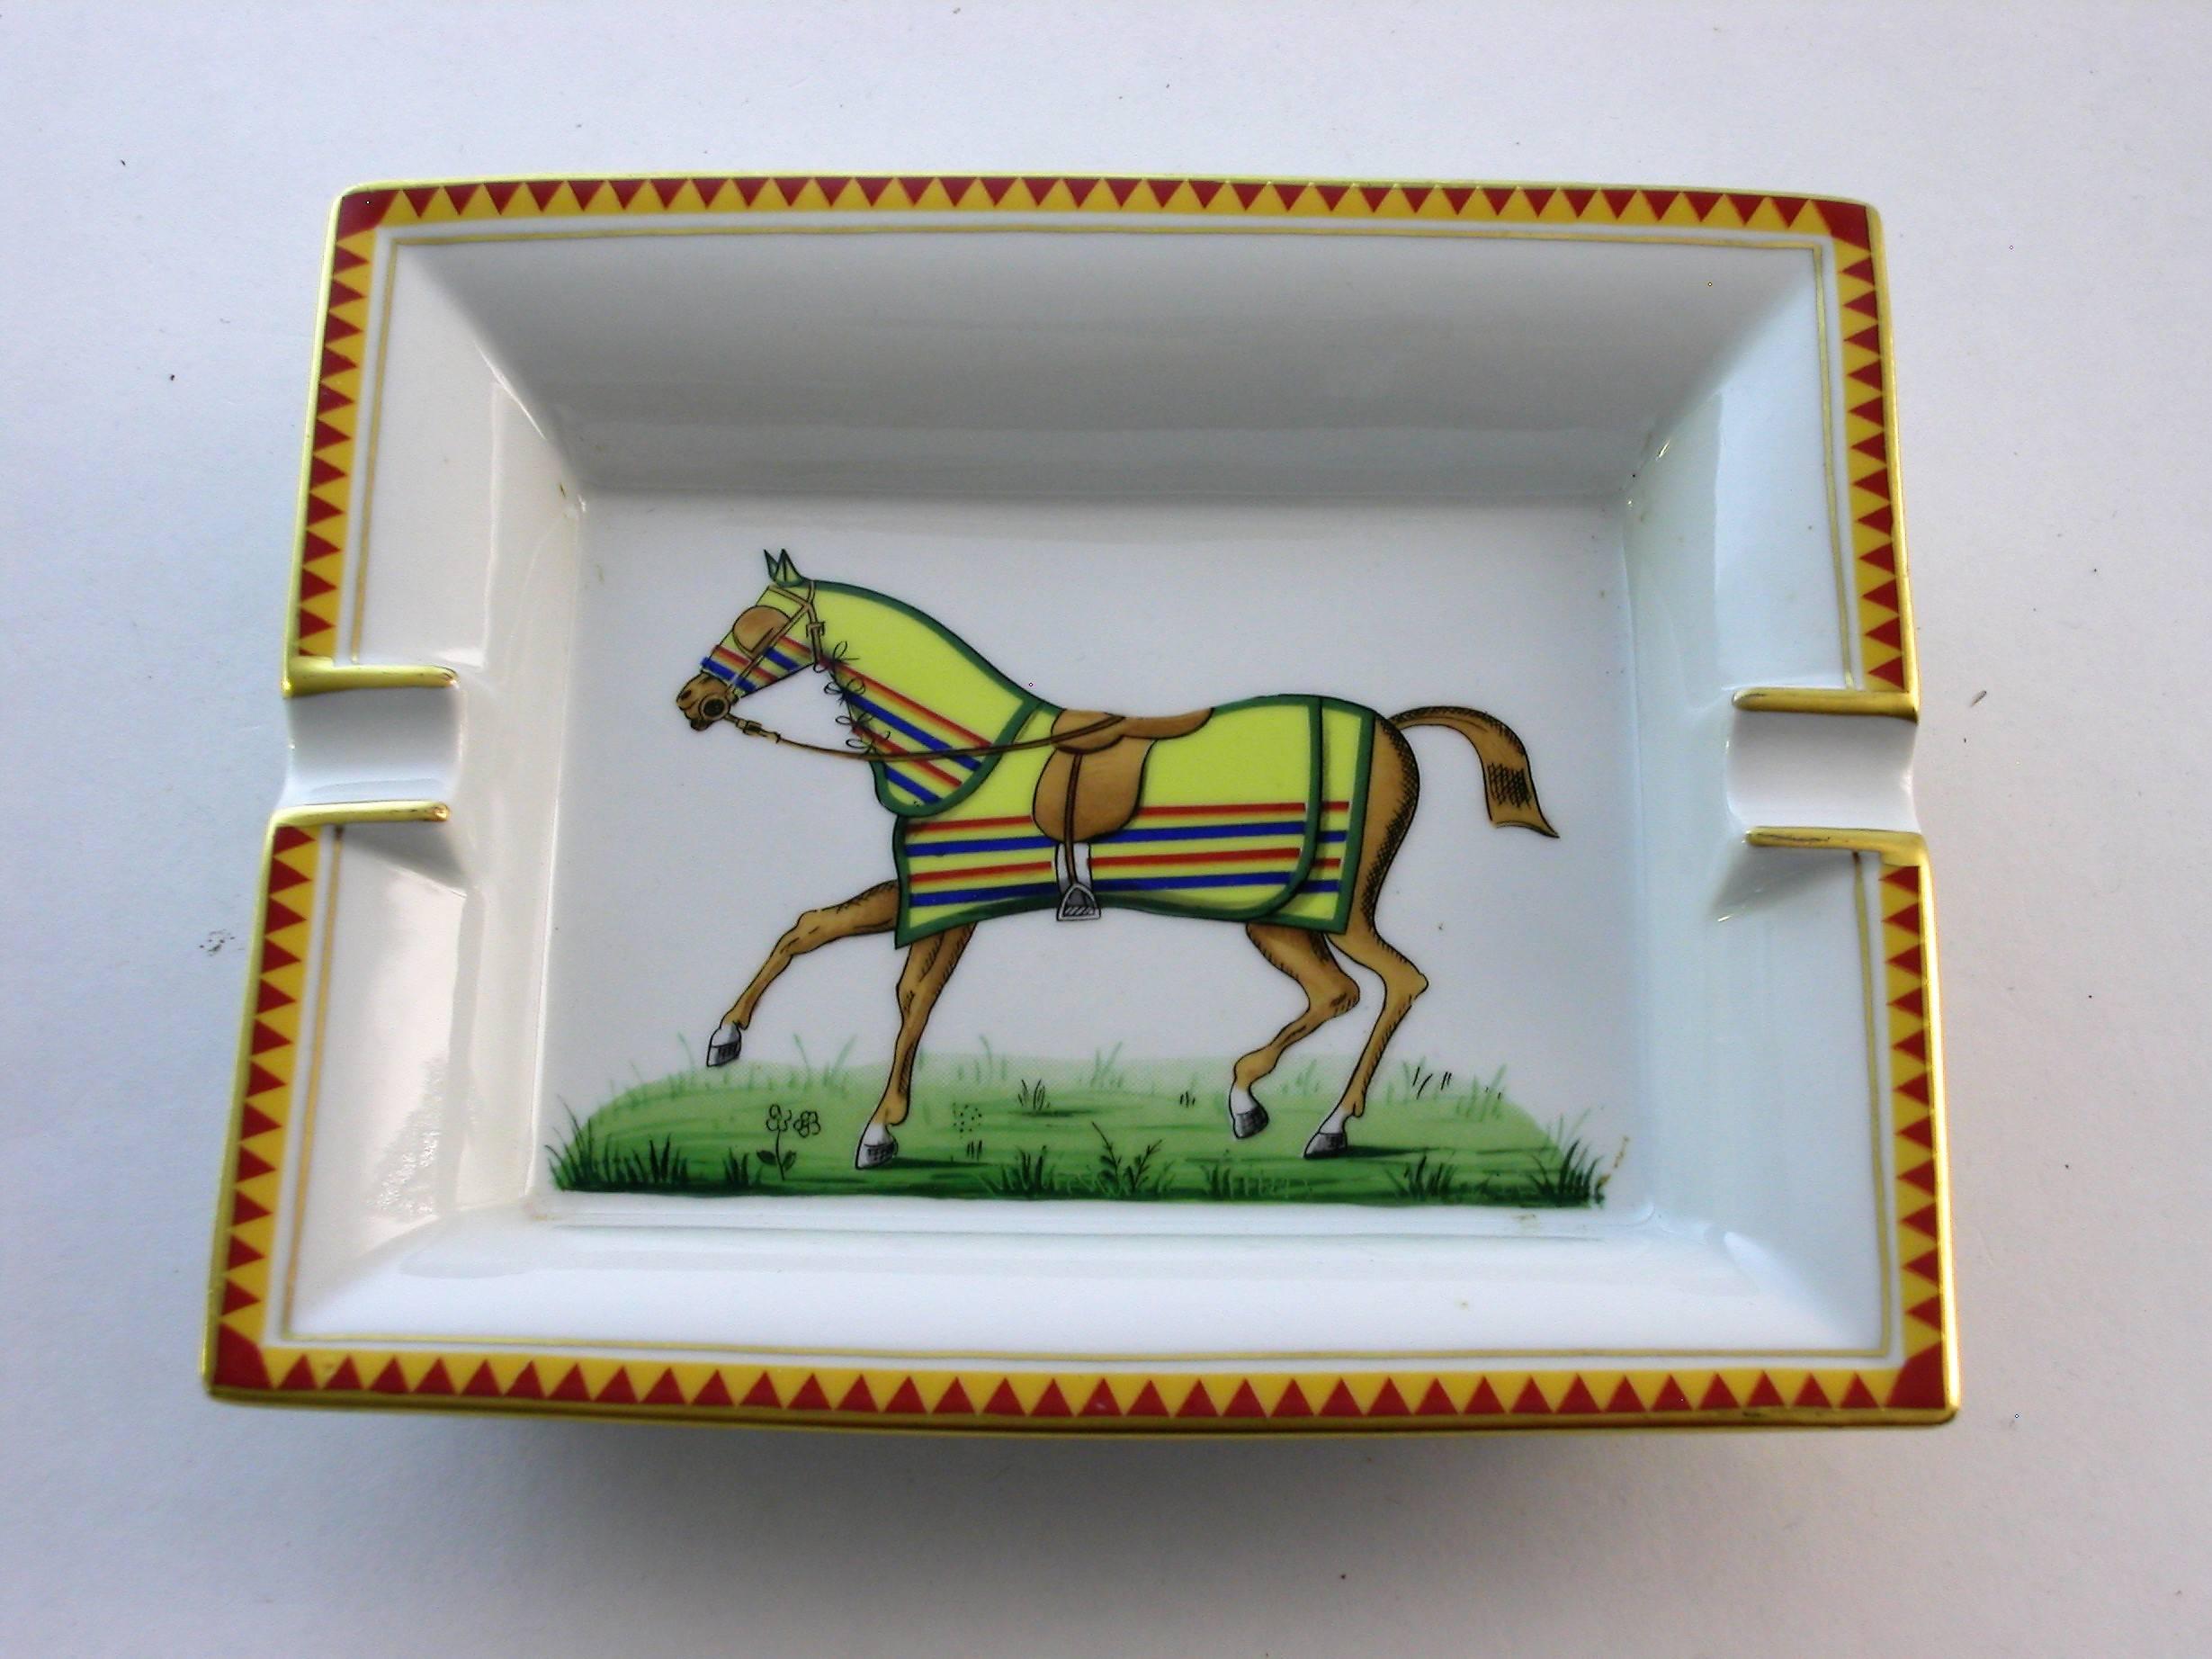 Hermès Paris, Ashtray with Horse, Hand-Painted 1